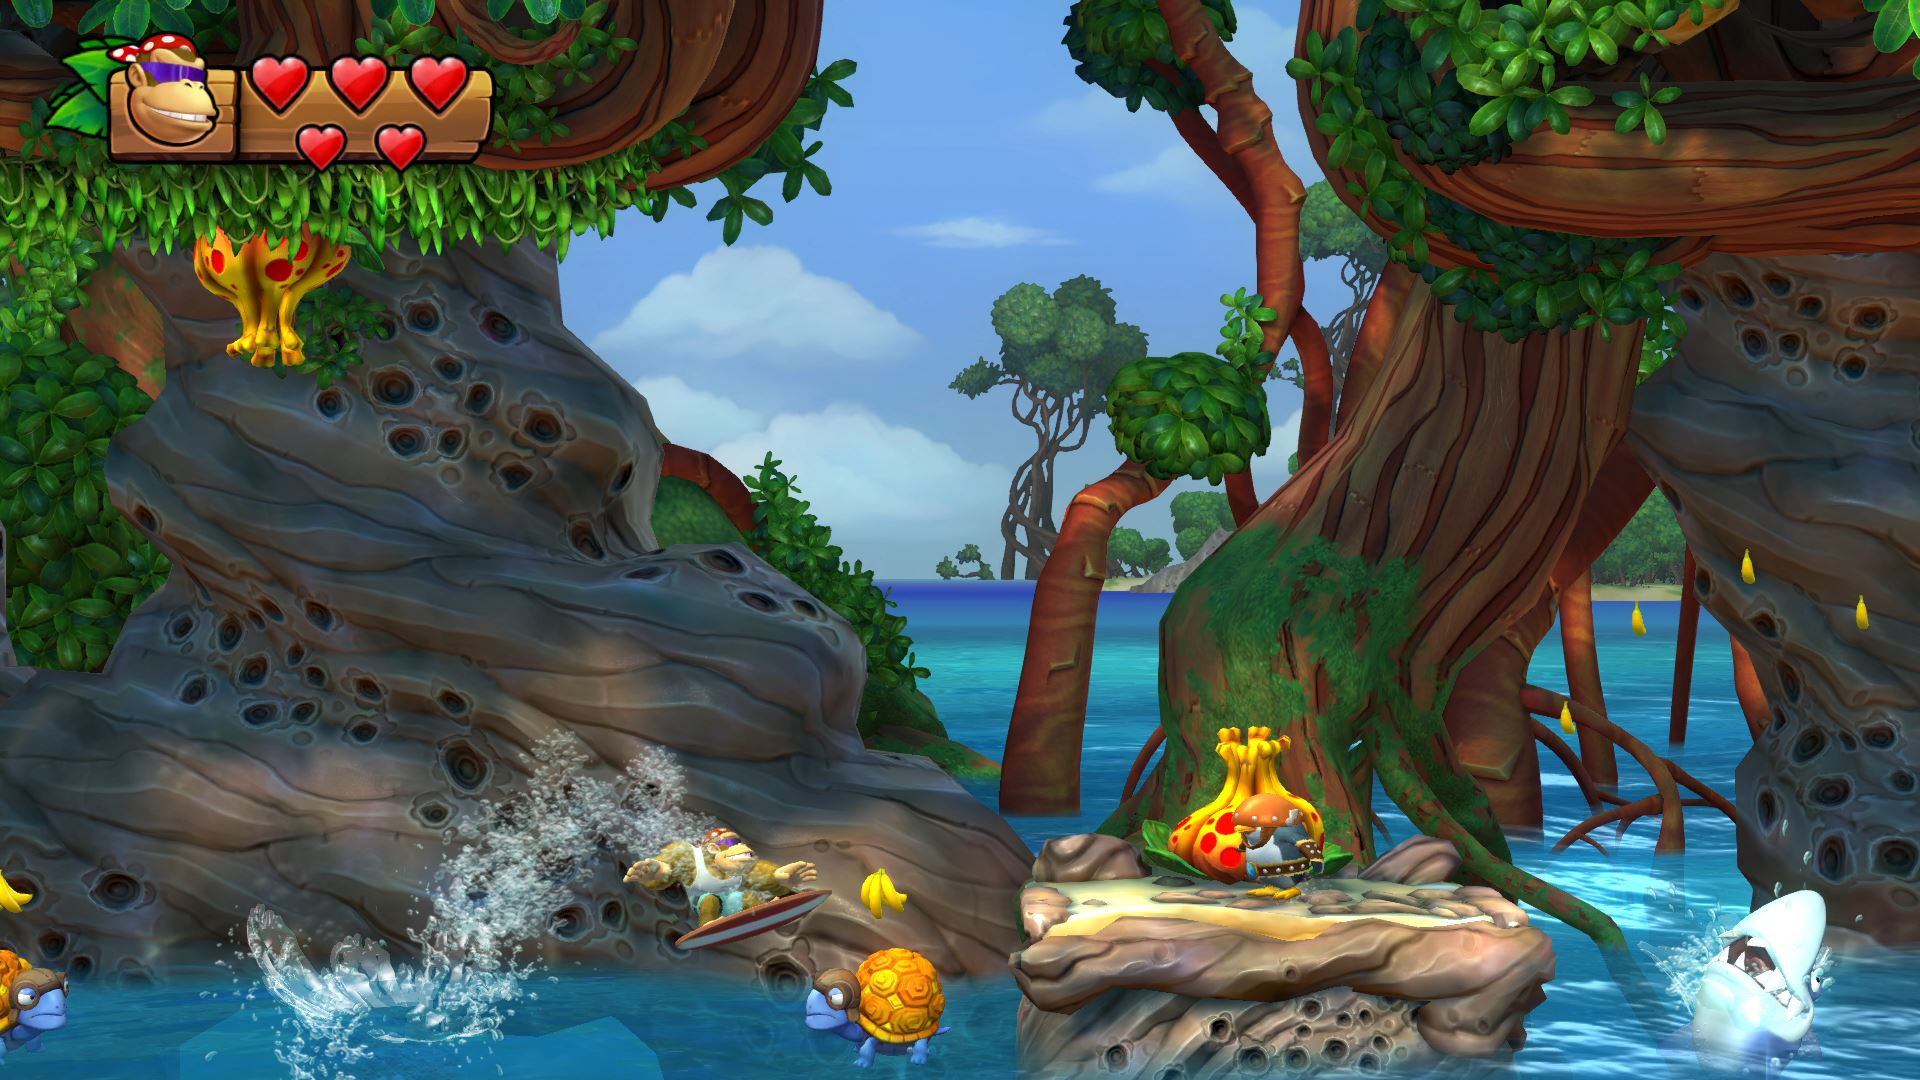 Donkey Kong Country: Tropical Freeze Preview - Funky Kong's Wild